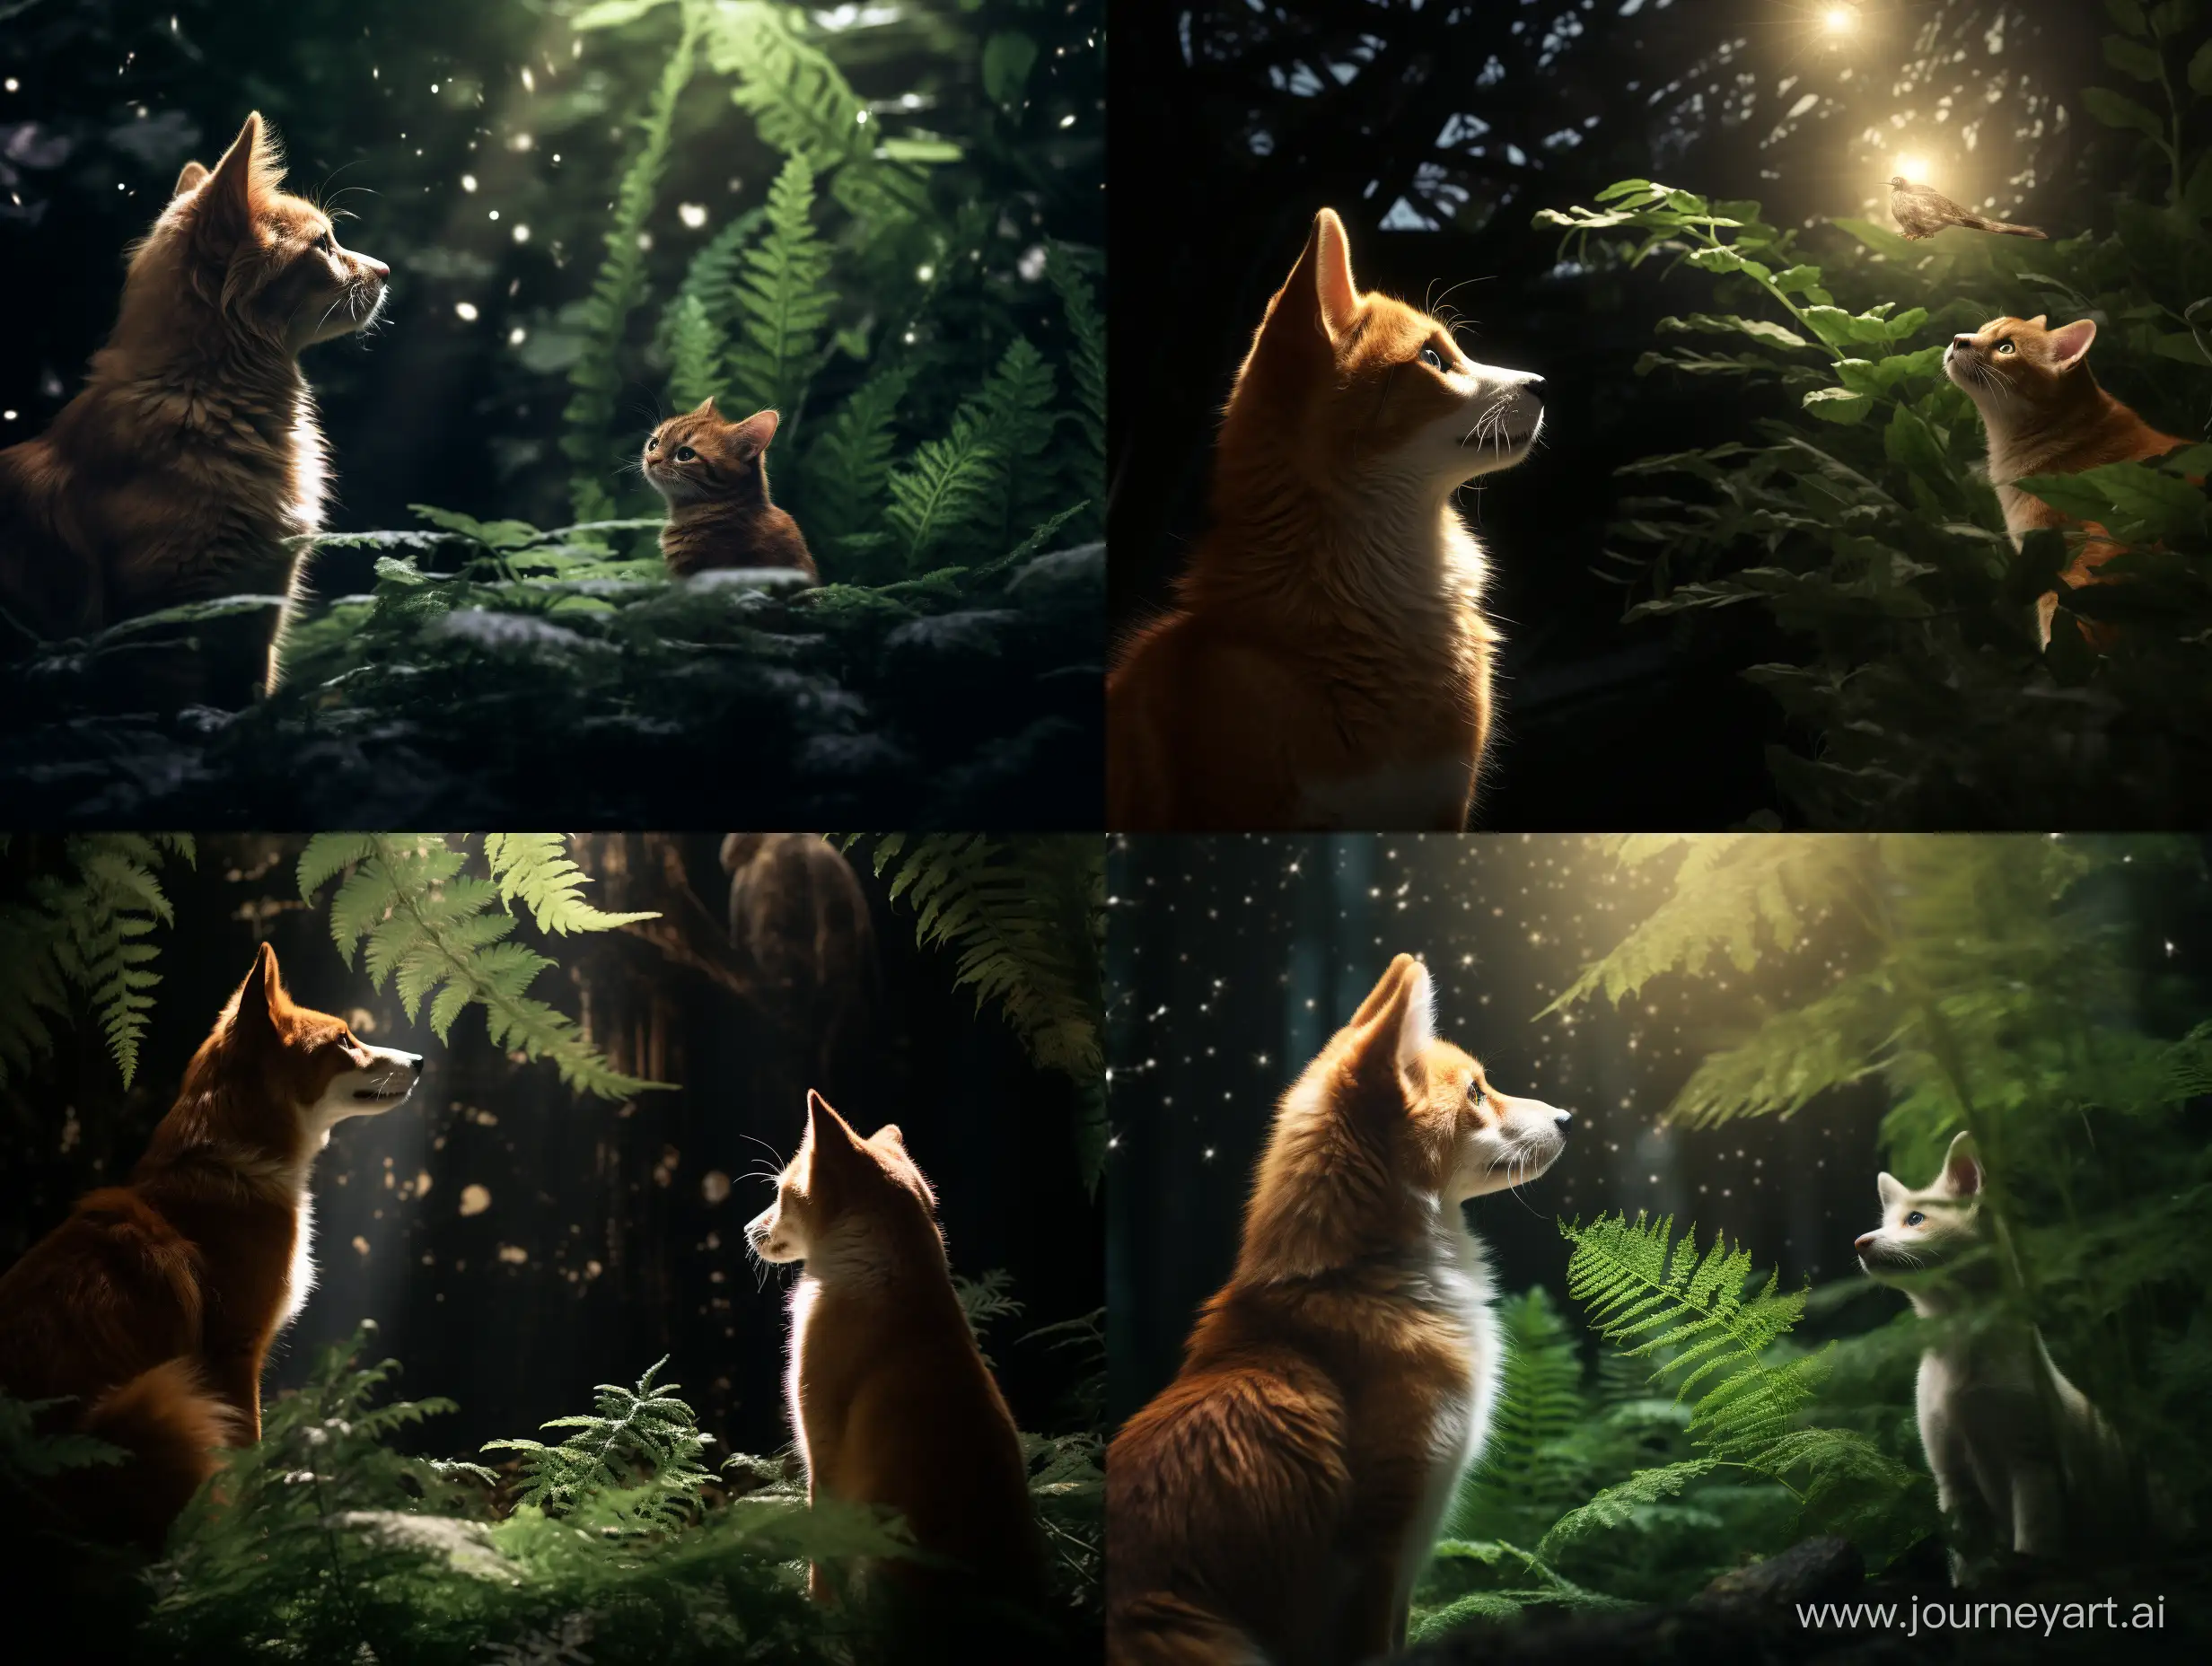 Enchanting-Glowing-Scene-in-High-Fern-Captures-Forest-Cat-and-Foxs-Curiosity